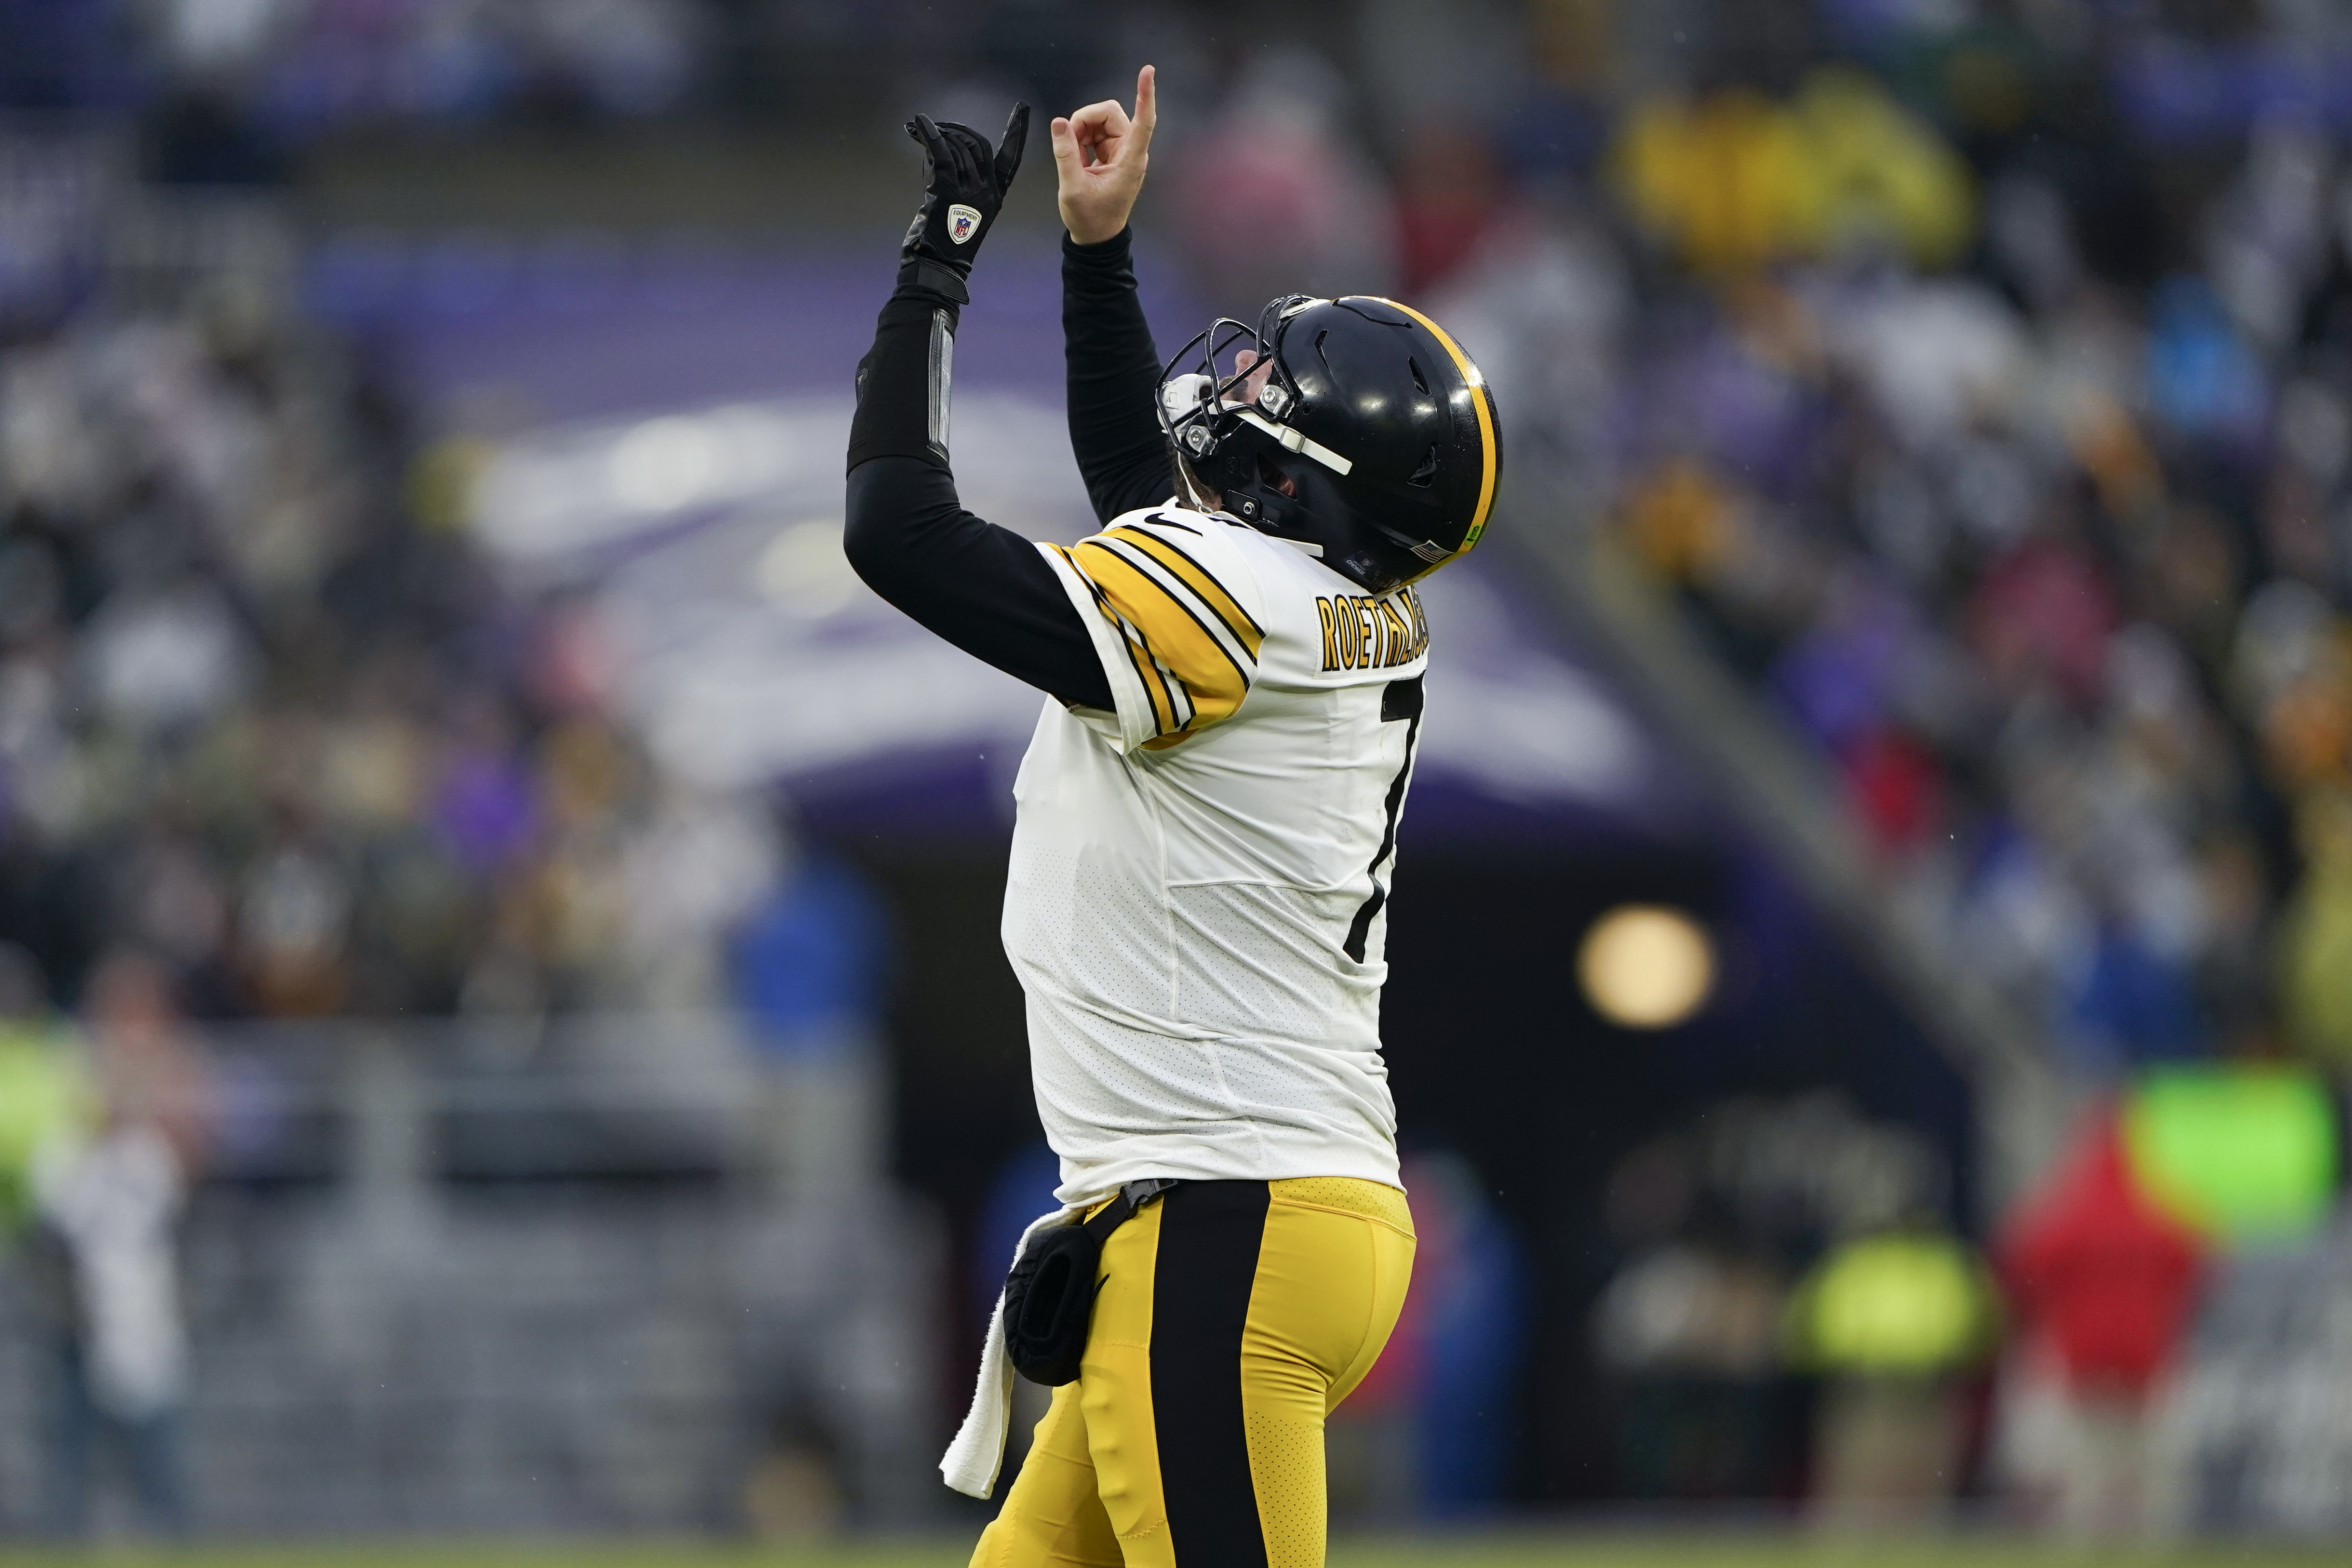 Former Steelers QB Ben Roethlisberger returning to field  as an  assistant youth football coach 